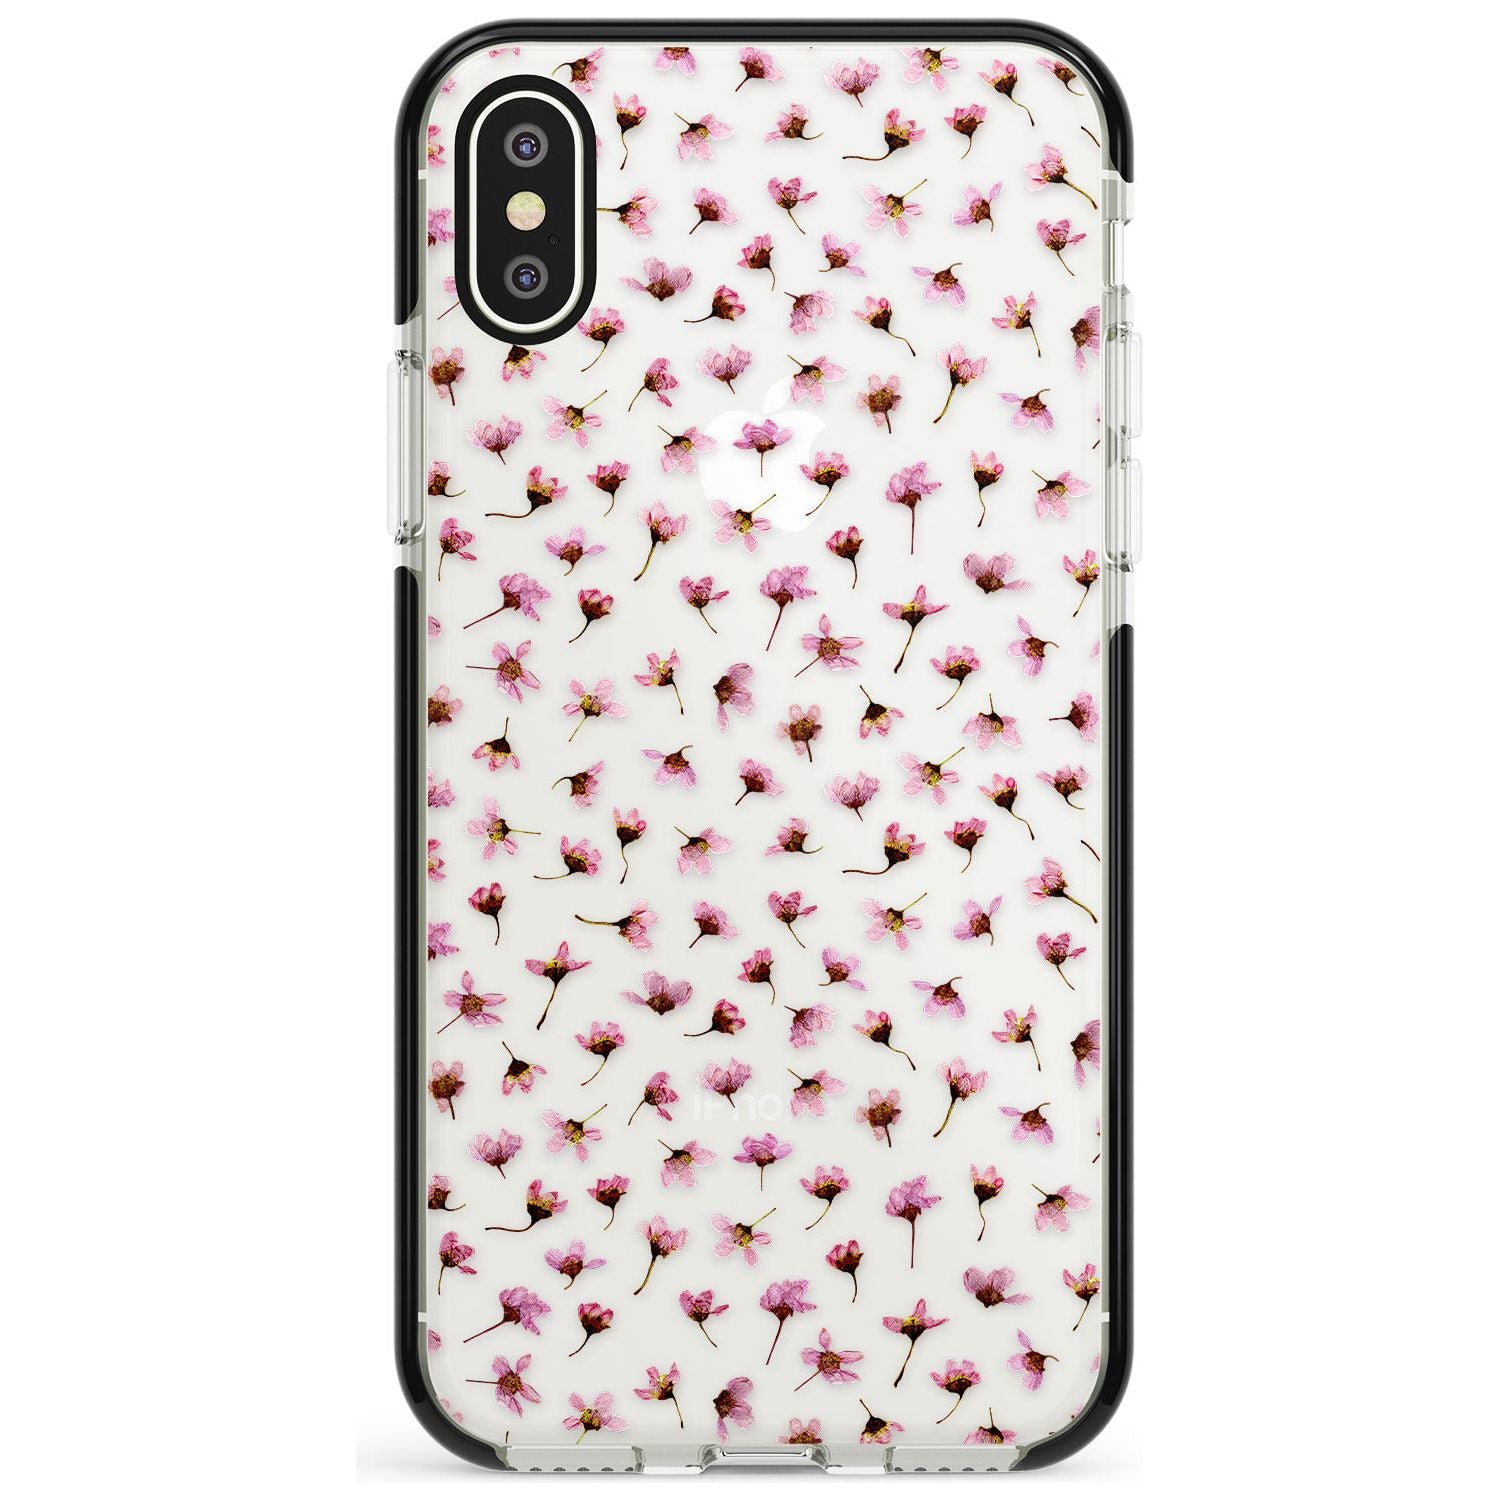 Small Pink Blossoms Transparent Design Black Impact Phone Case for iPhone X XS Max XR